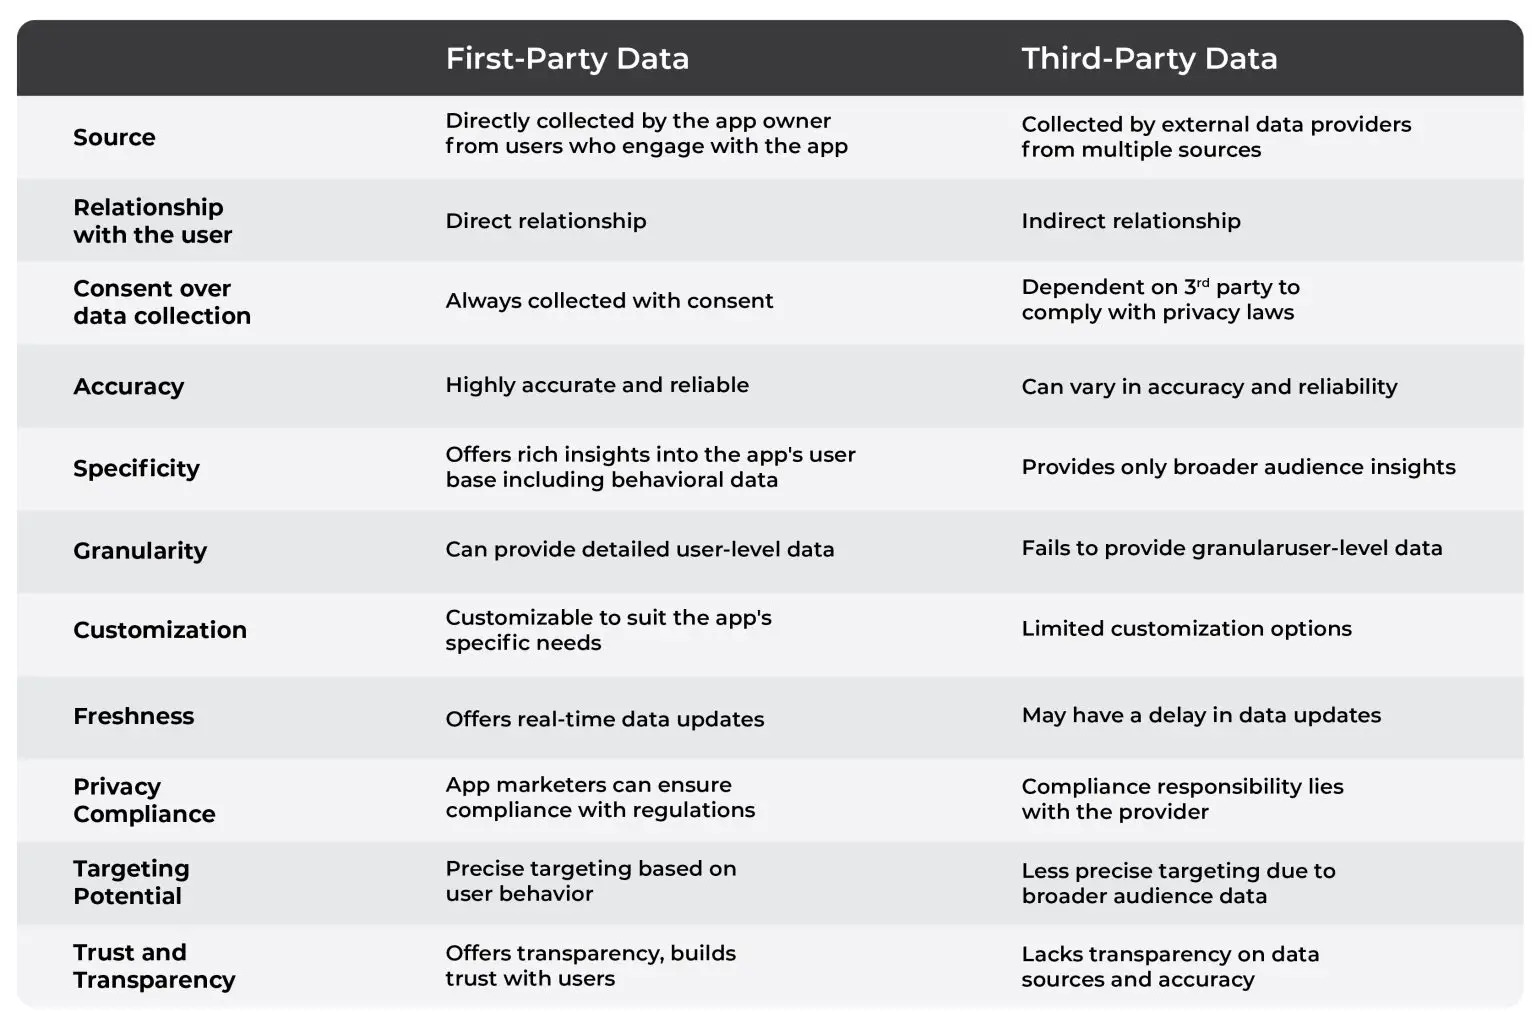 Difference between first party and third party data